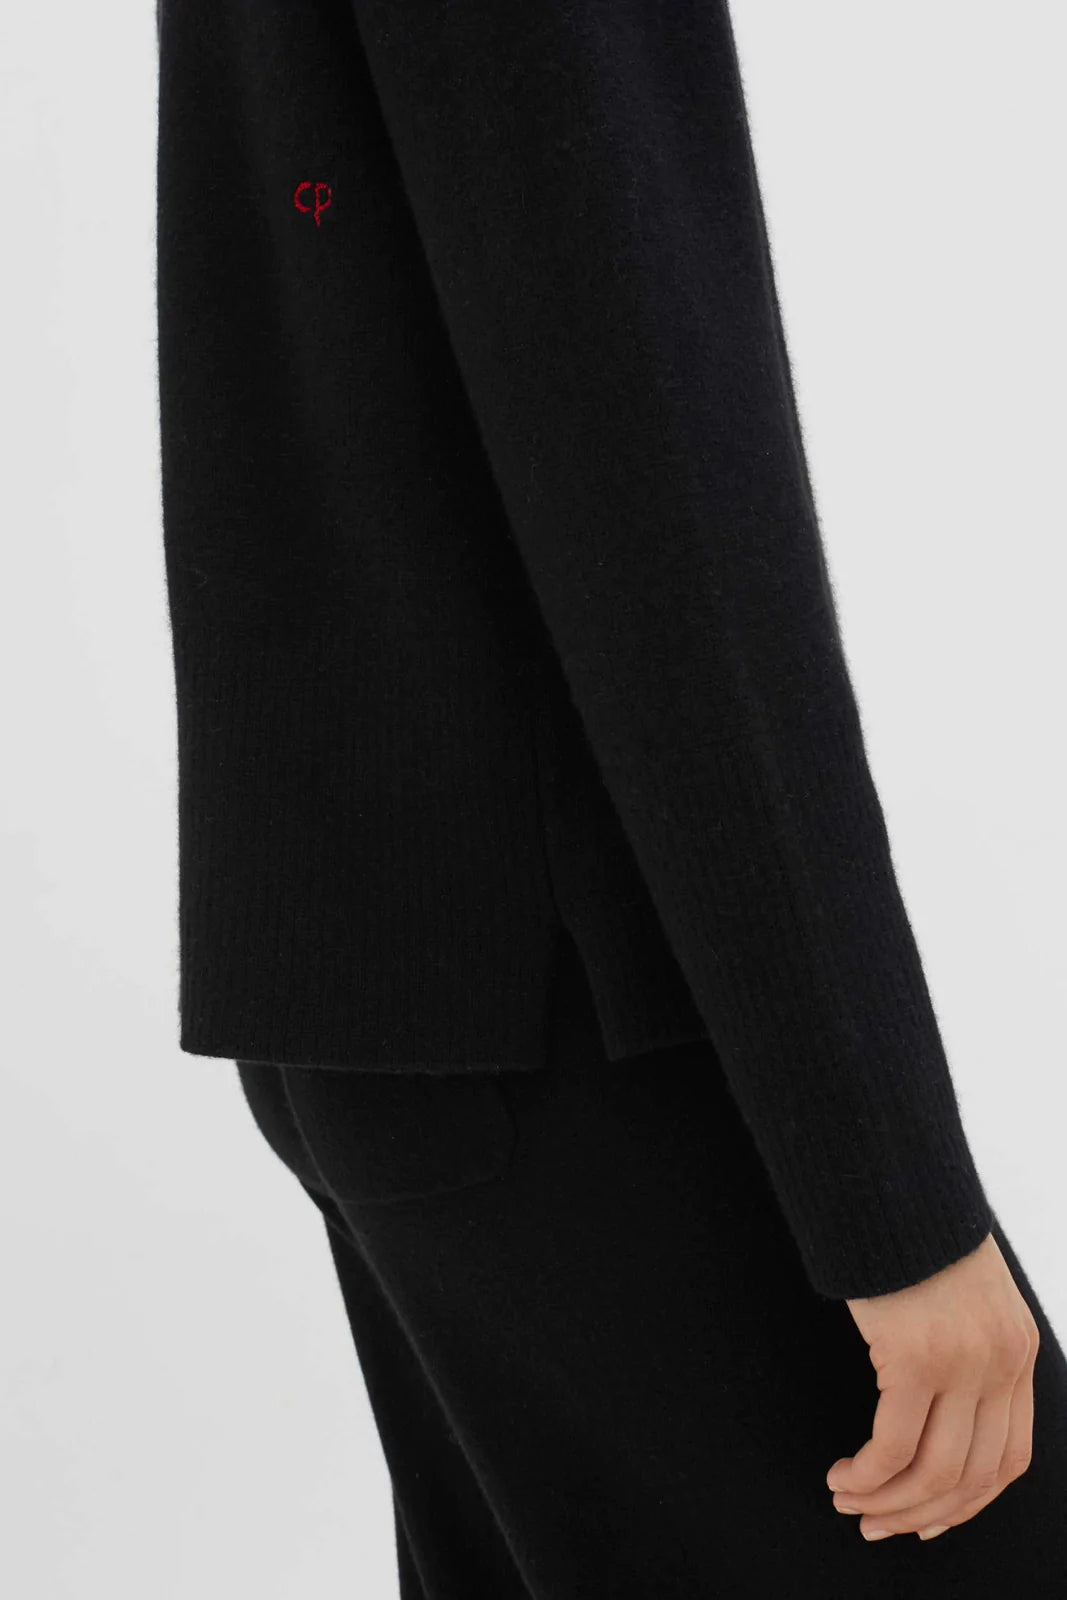 Cashmere Boxy Sweater - Black - Frontiers Woman